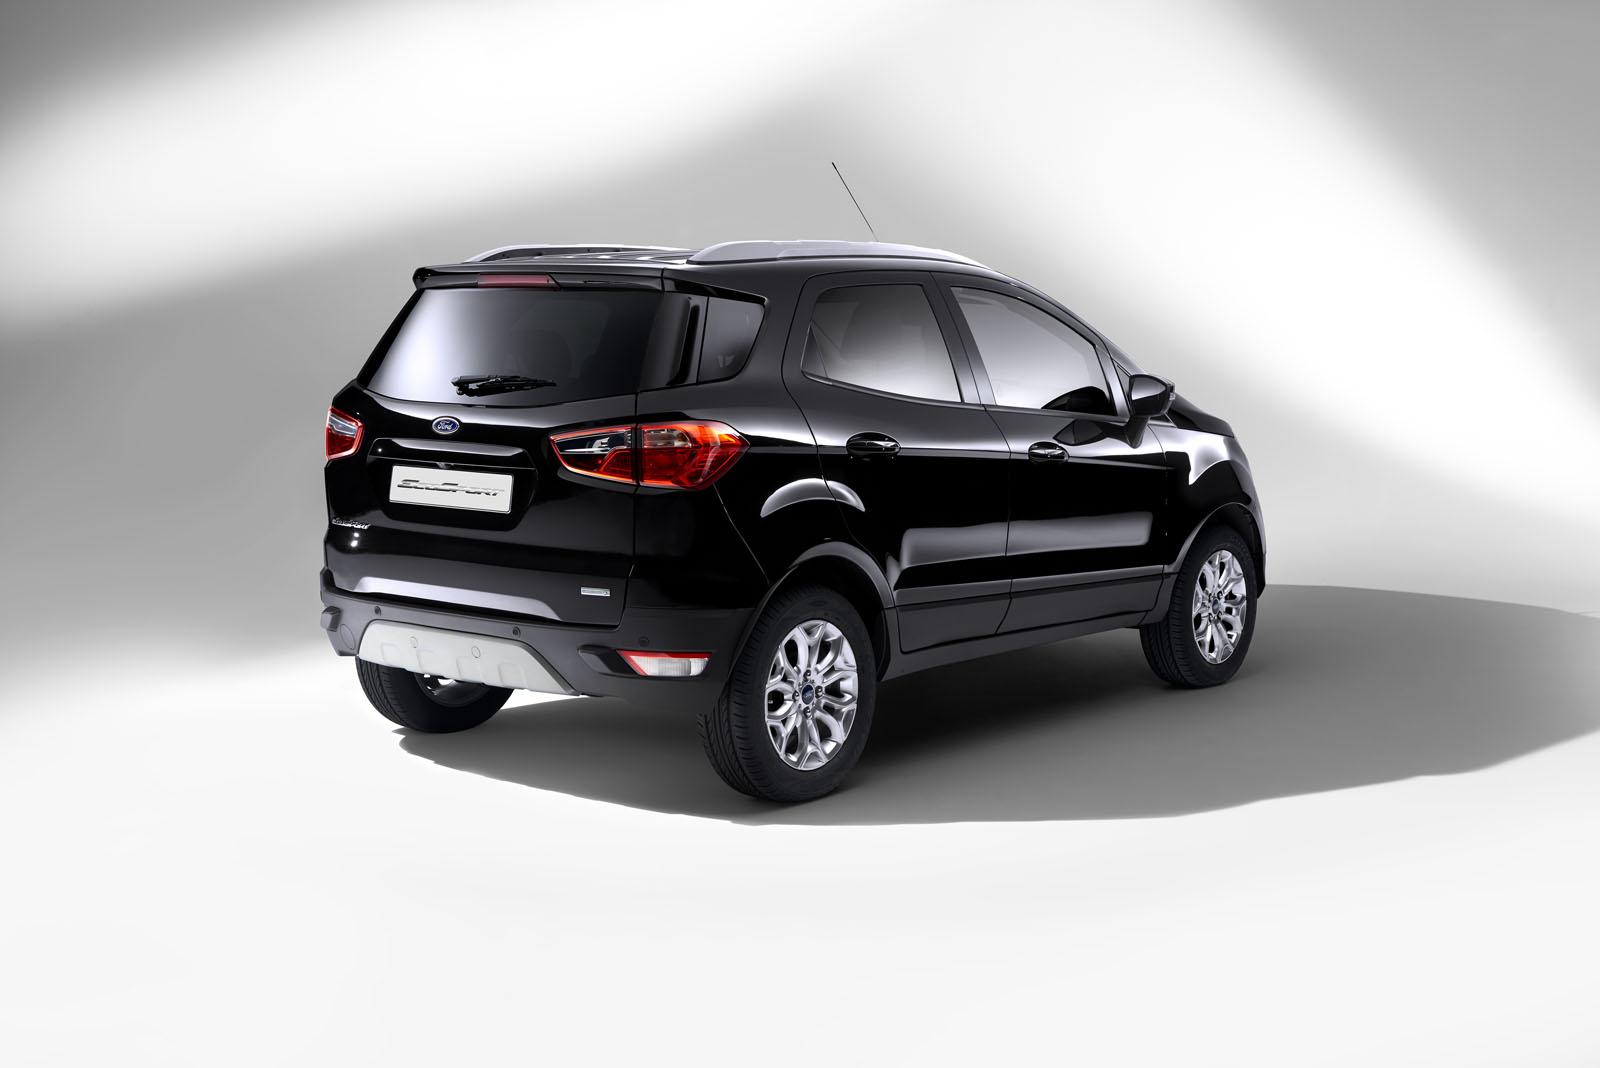 2016 FORD ECOSPORT AVRUPA RESM GALERS